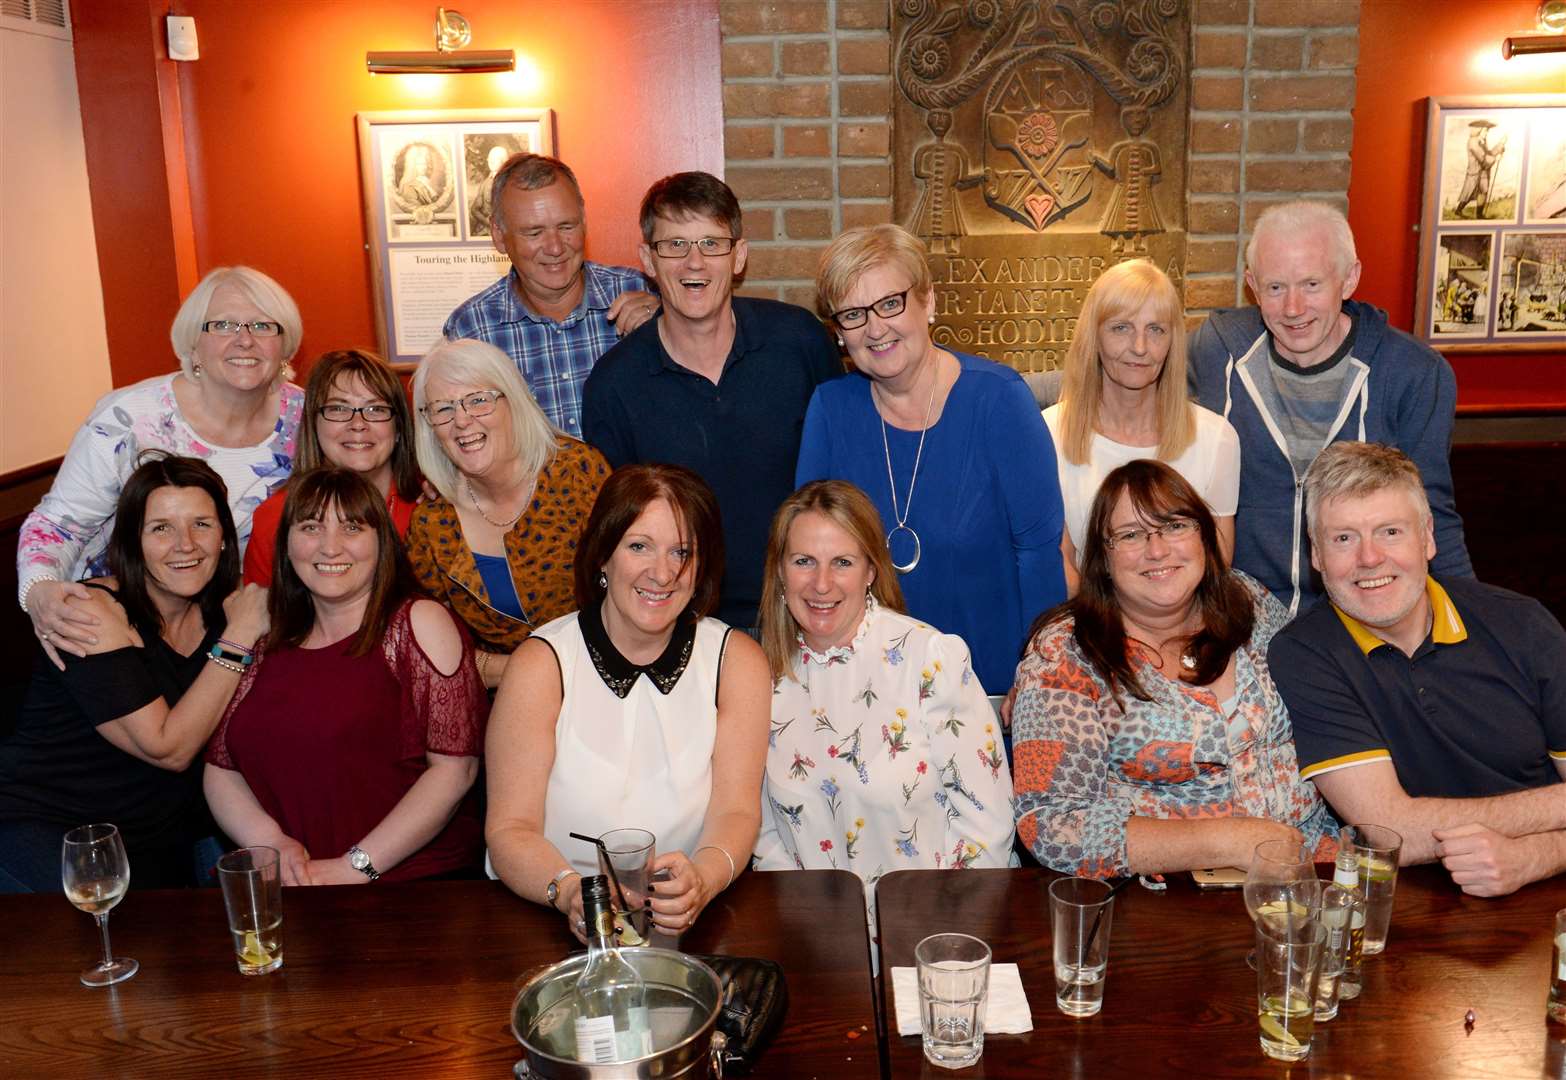 Former colleagues of Inverness Post Office enjoy reunion night.